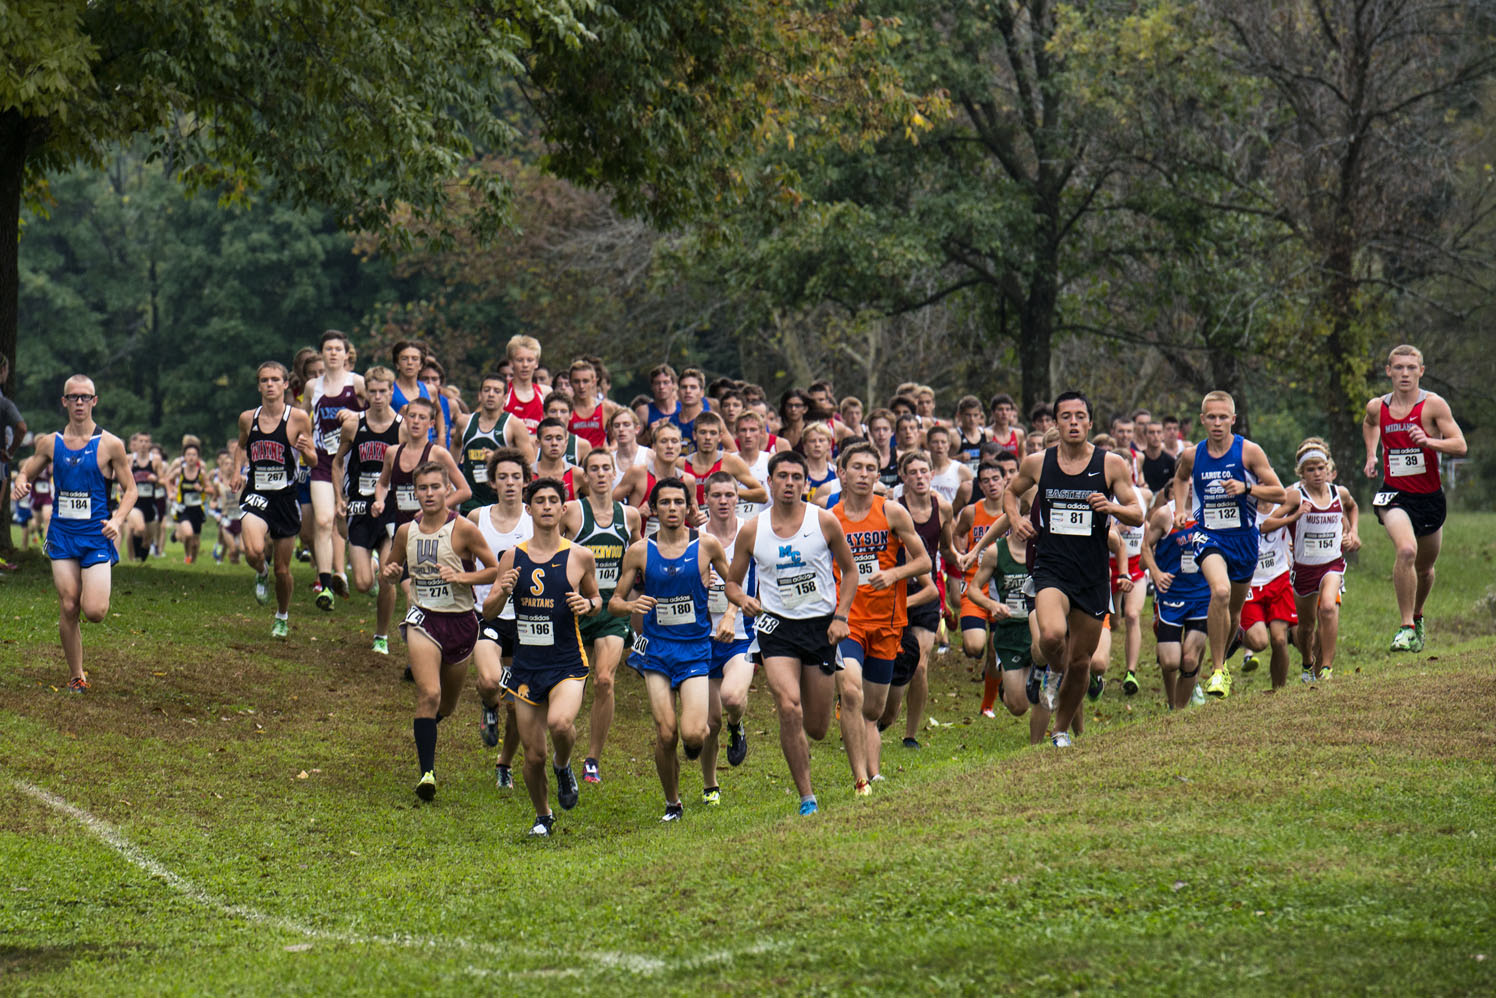 Changes made to high school cross country in hopes that 